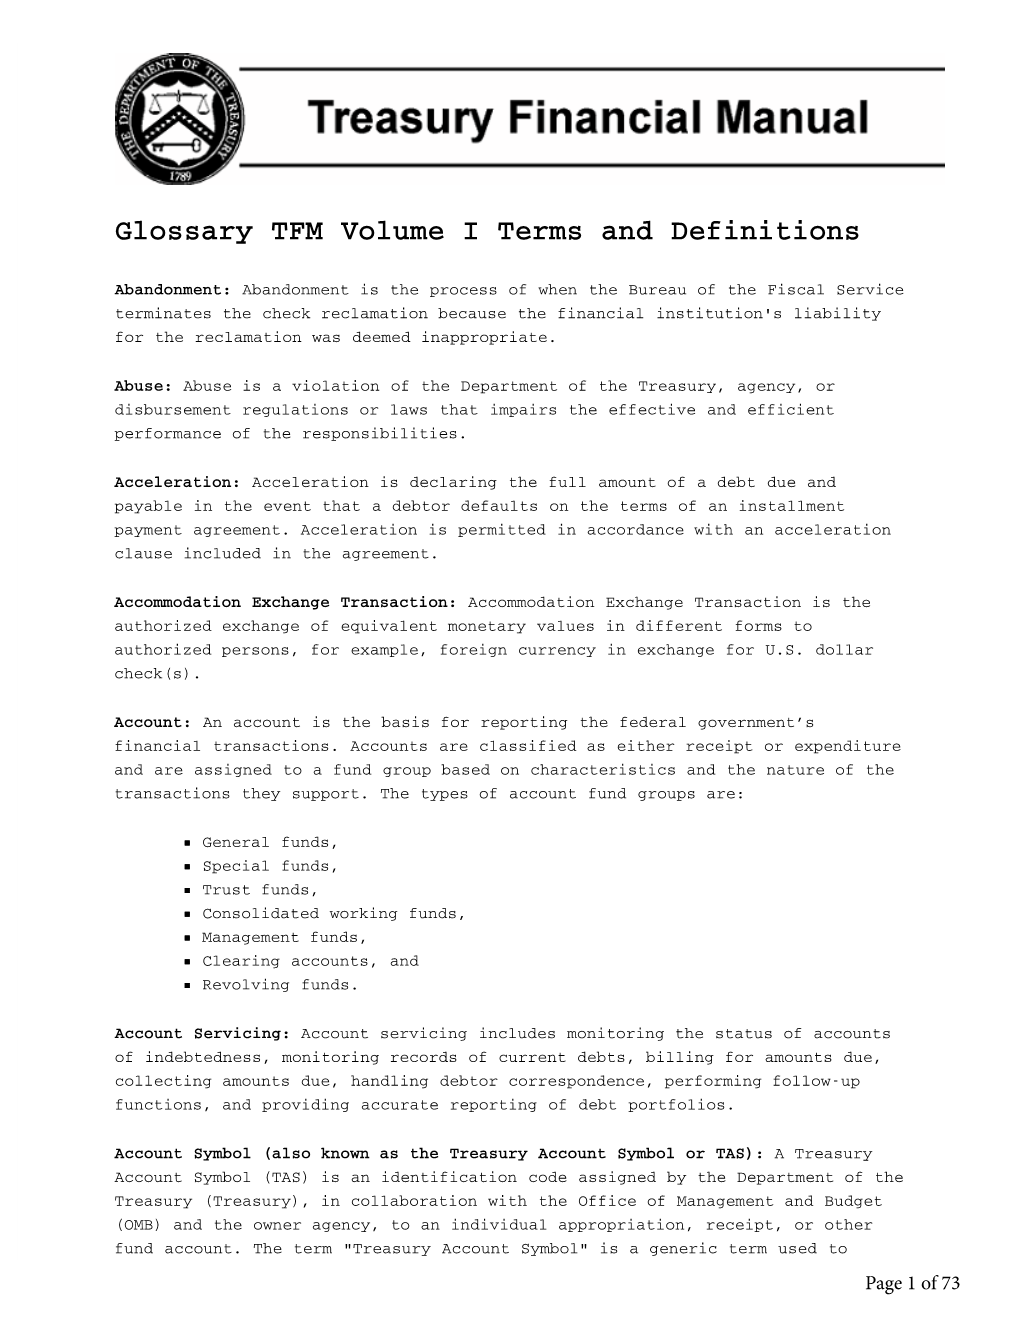 Glossary TFM Volume I Terms and Definitions